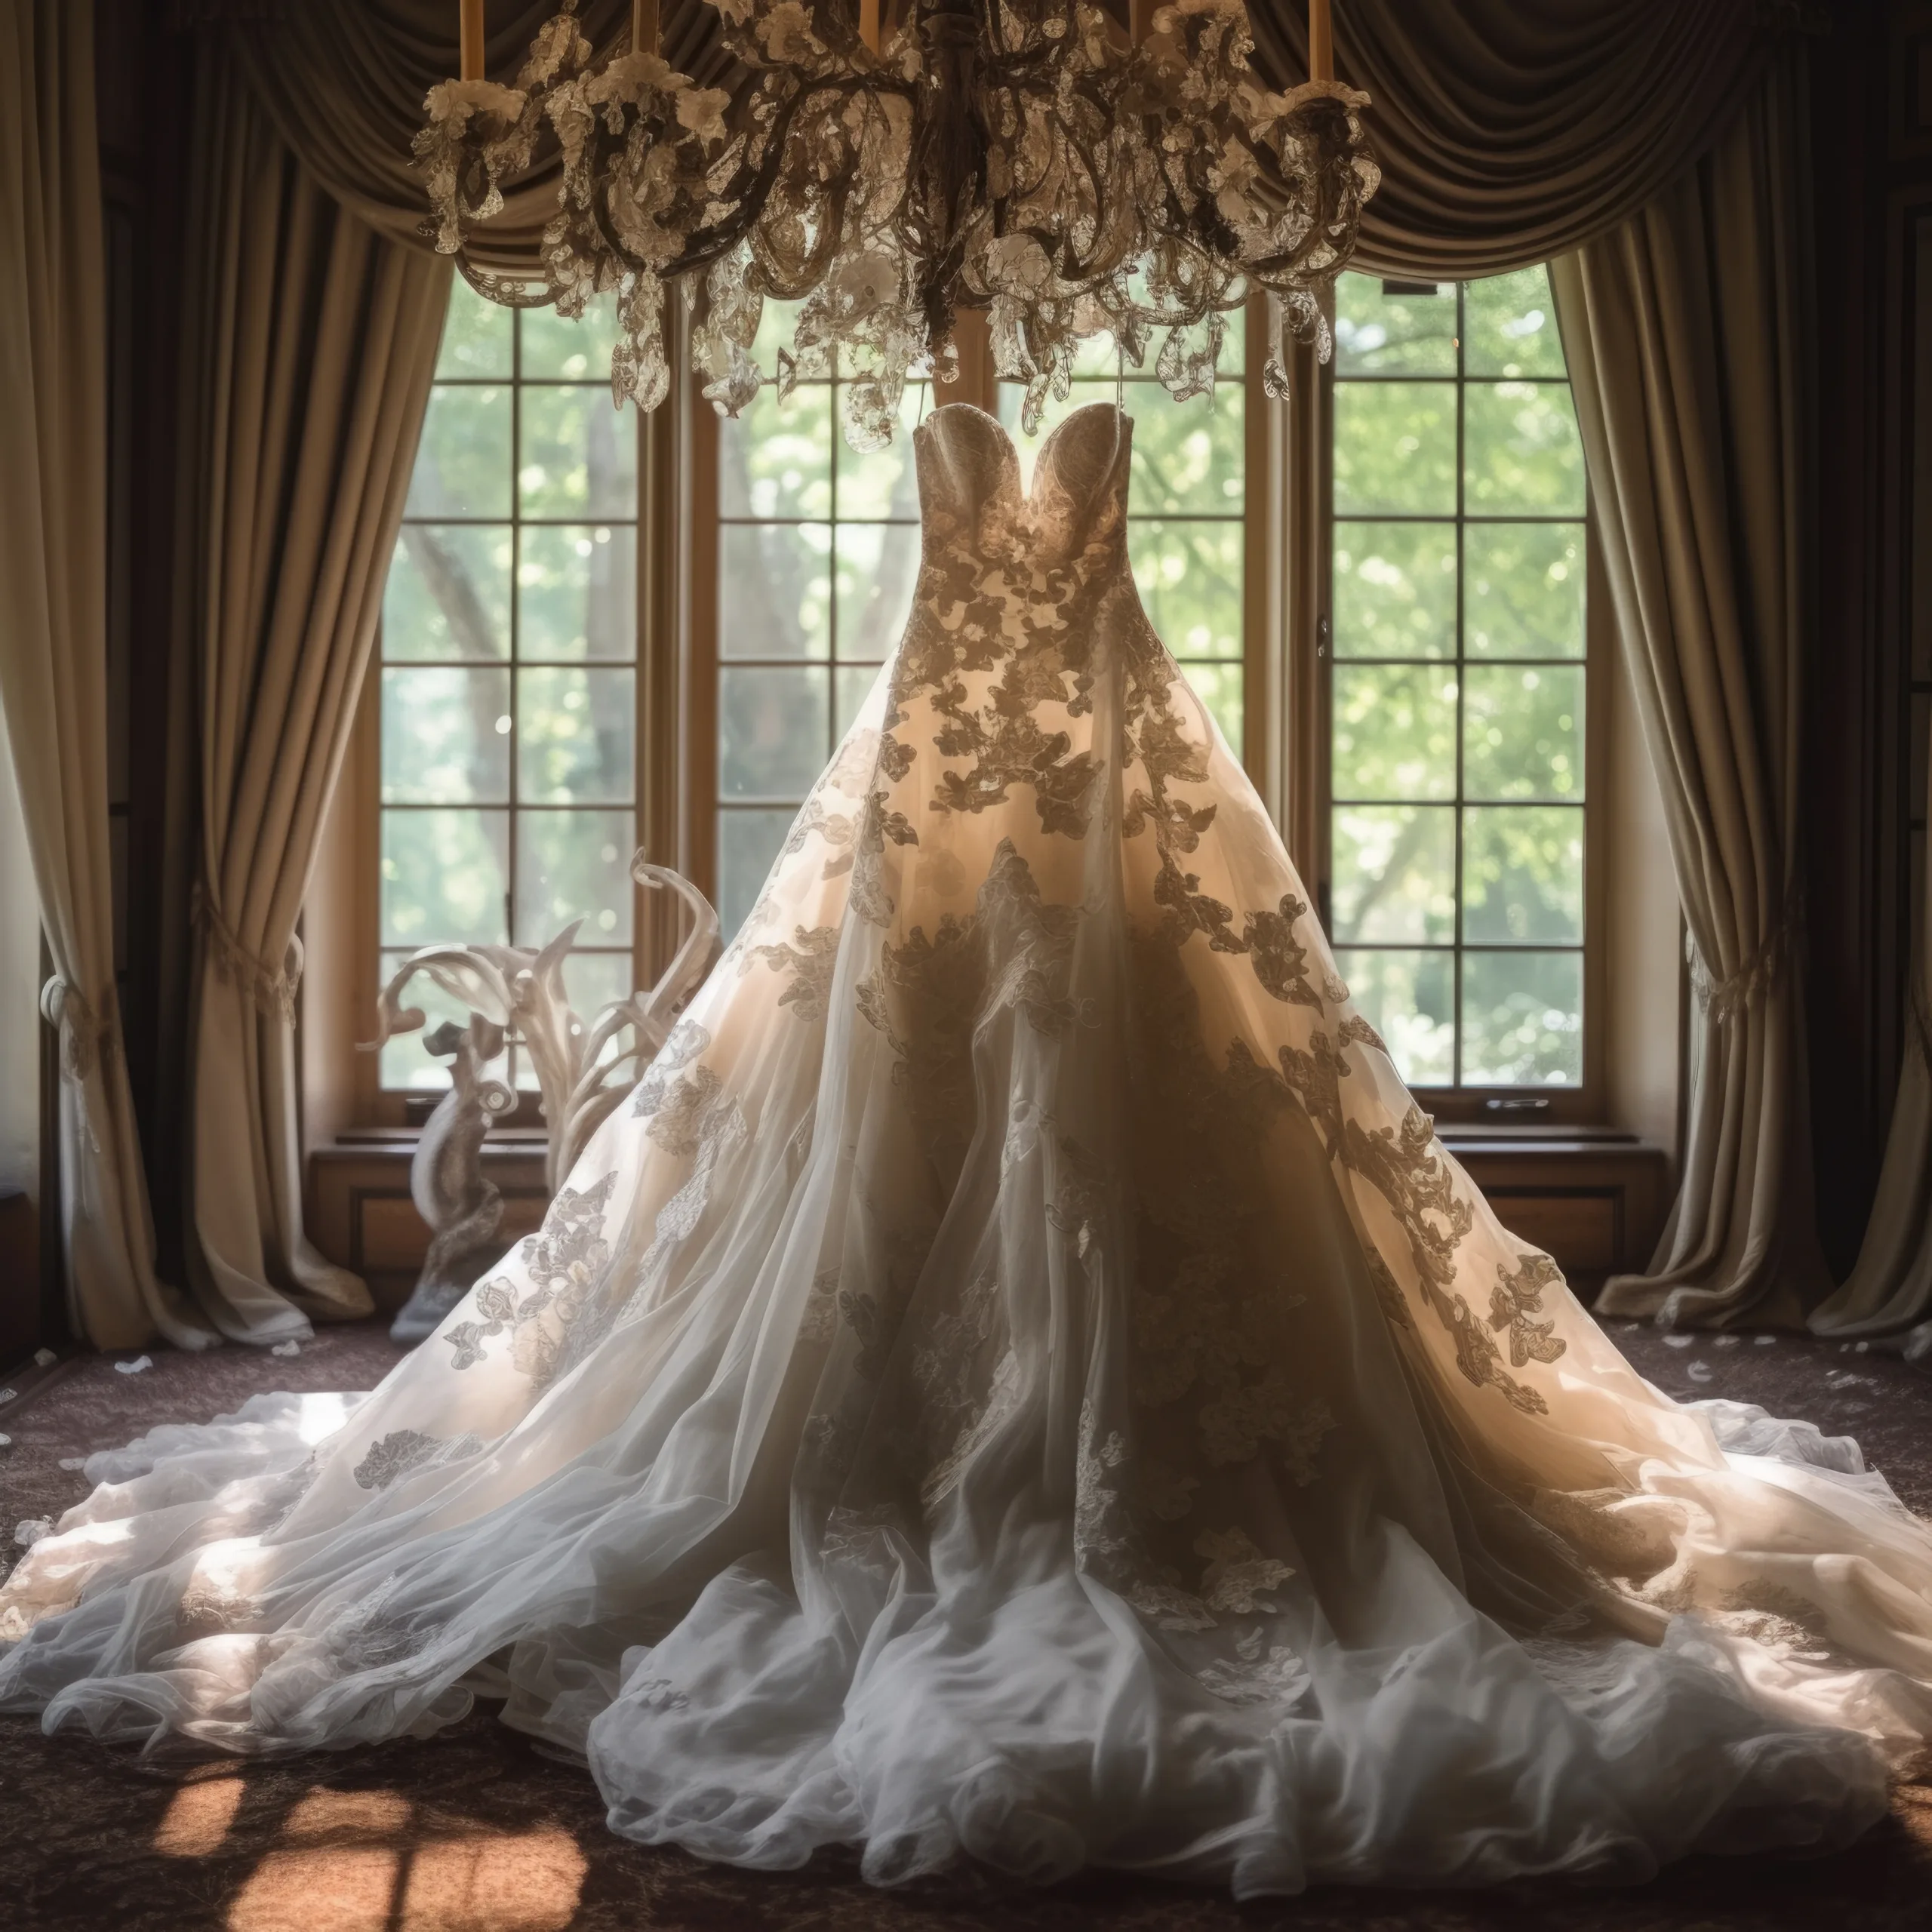 Farleigh House Bath:A wedding dress hangs in front of a chandelier in a room.